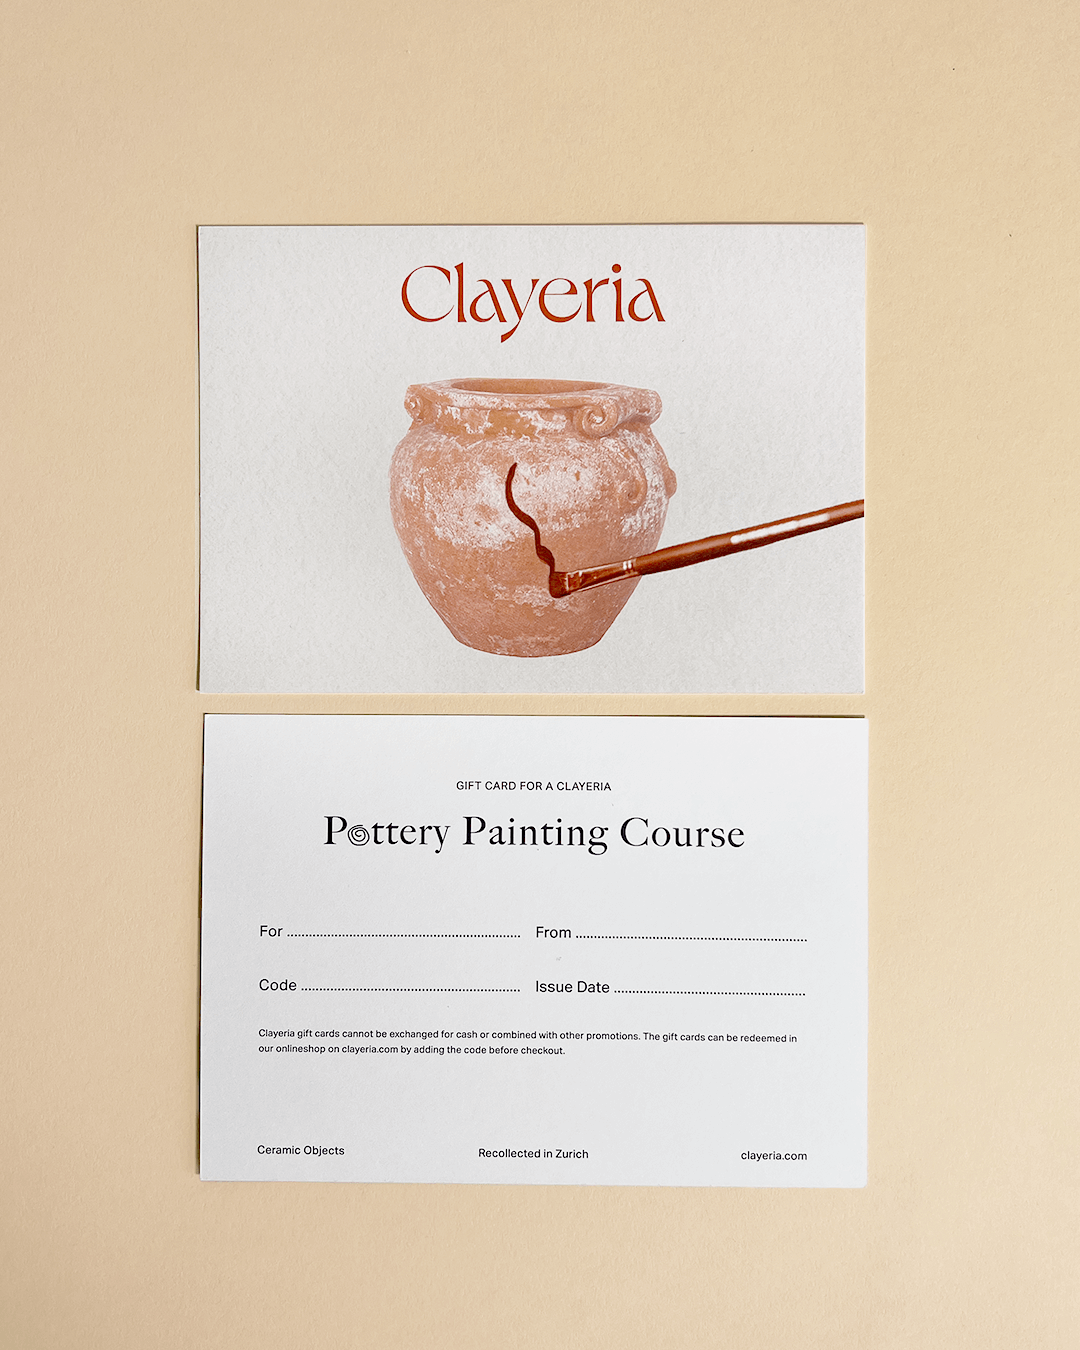 Giftcard for a Clayeria Pottery Painting Course.